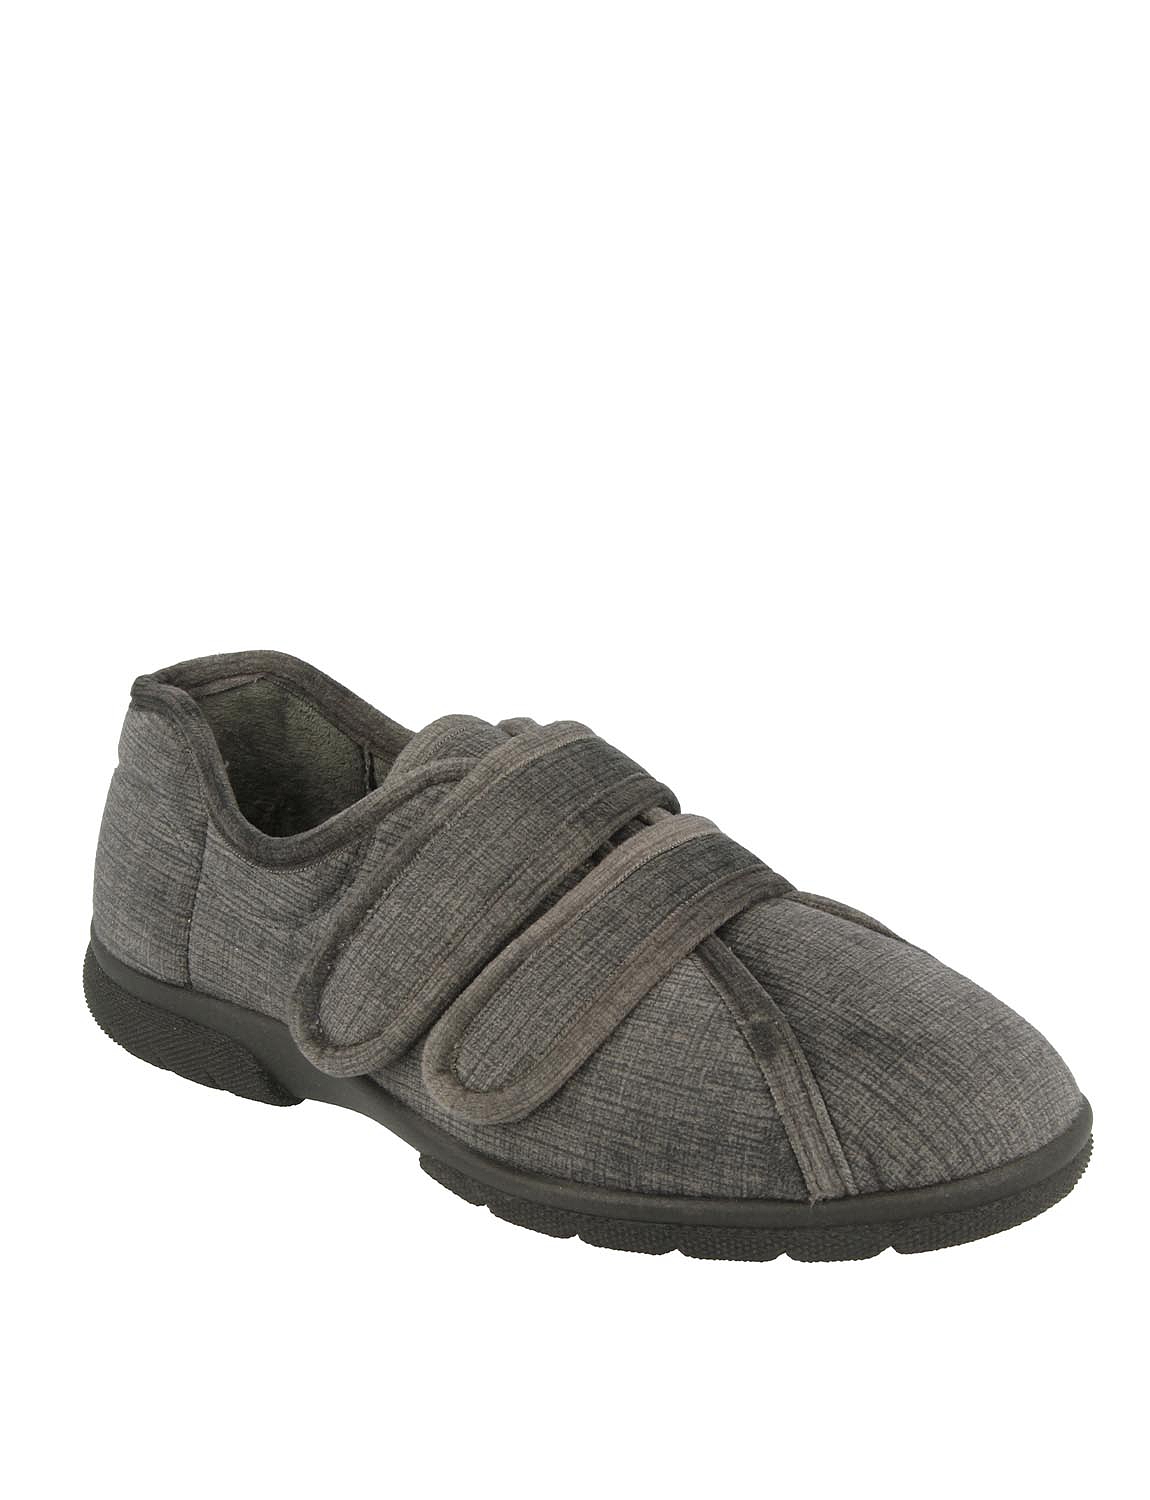 mens wide house shoes